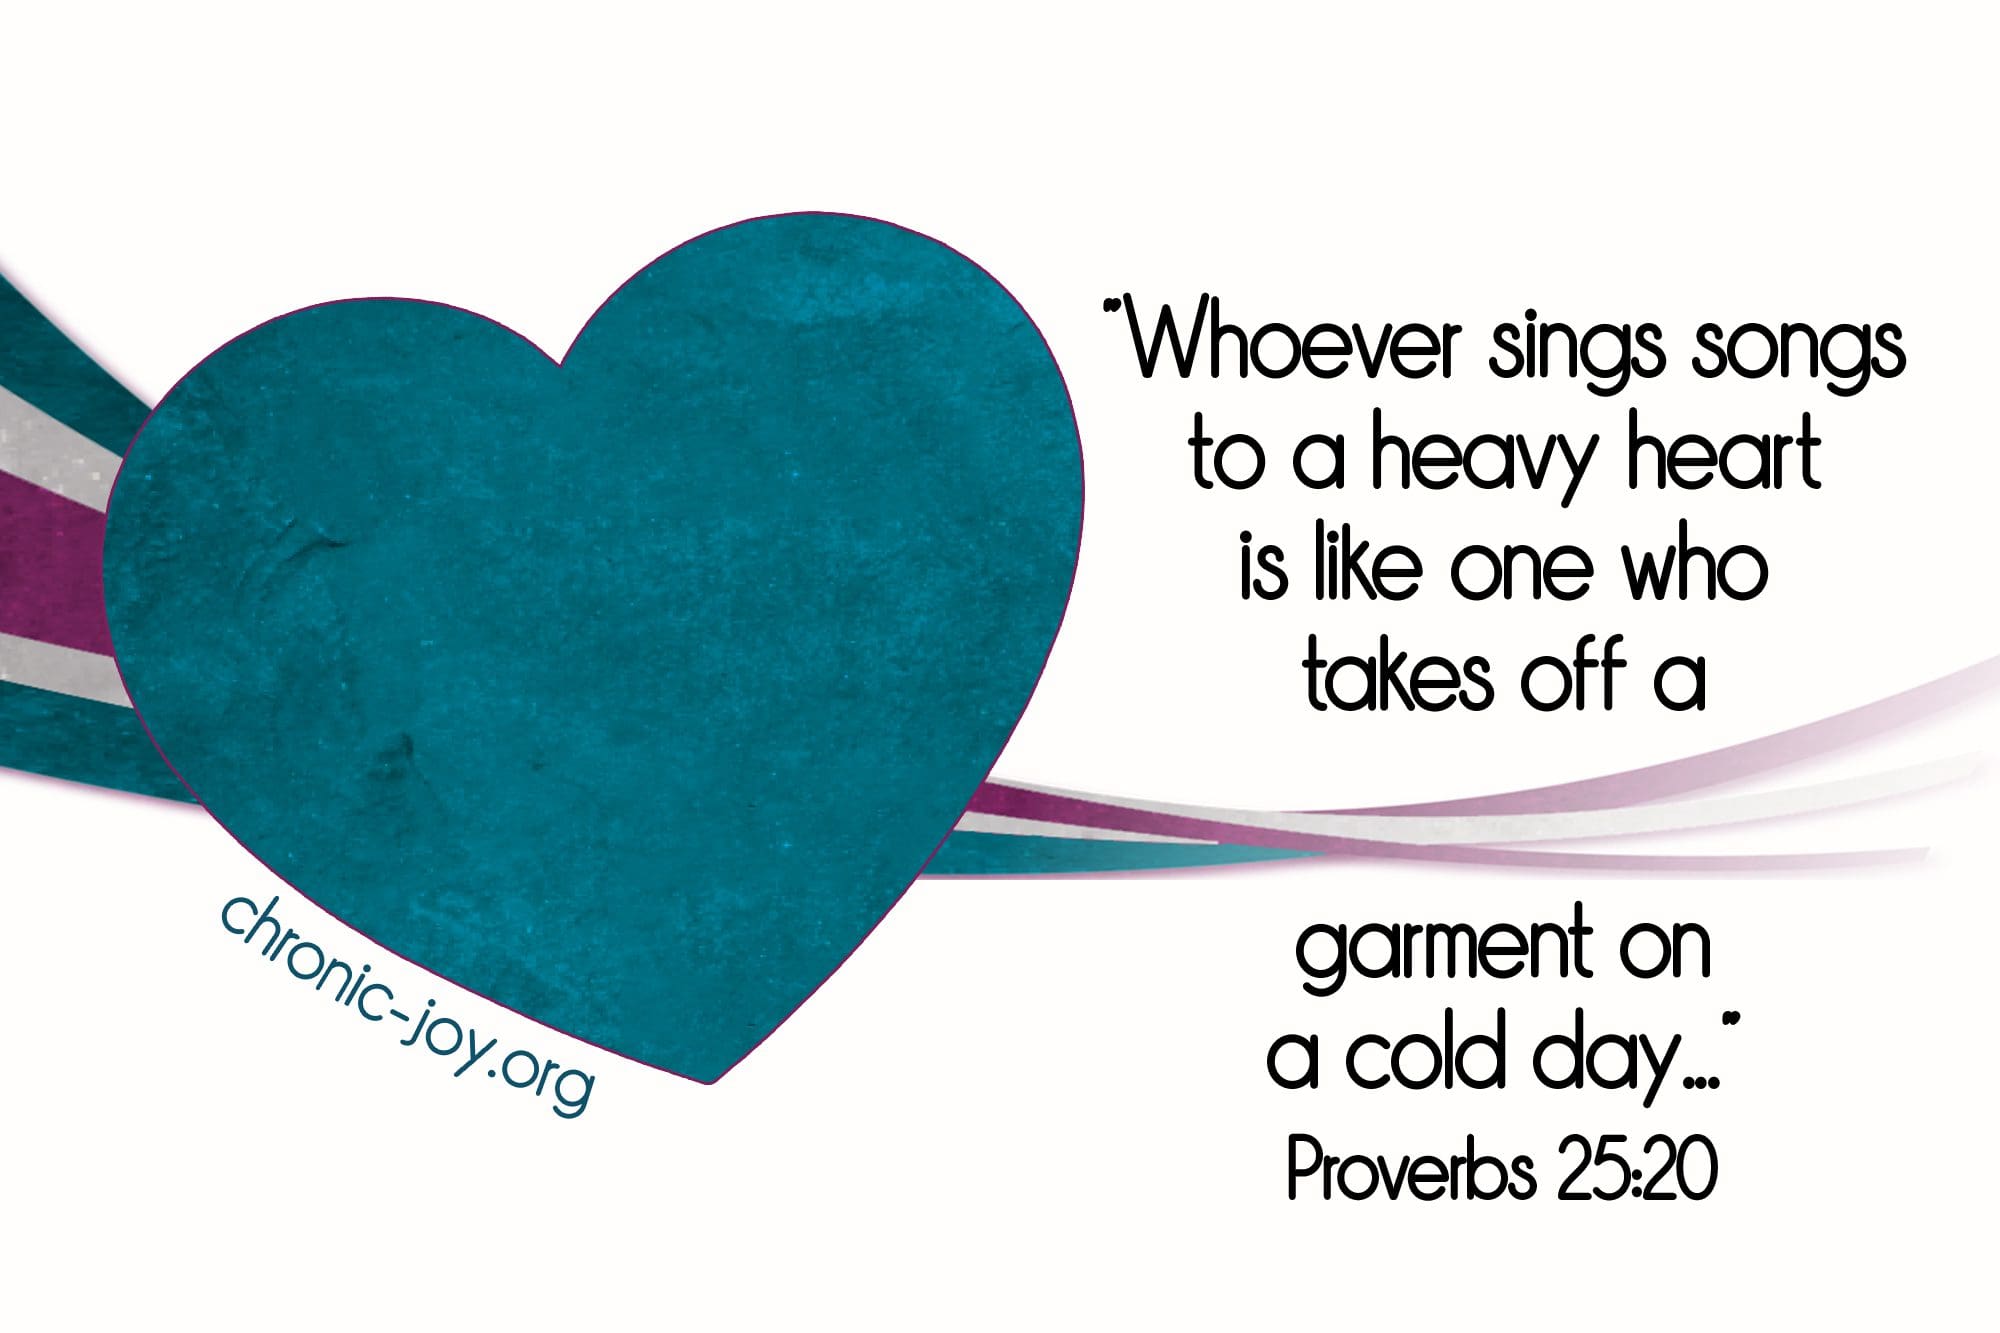 “Whoever sings songs to a heavy heart is like one who takes off a garment on a cold day...” Proverbs 25:20